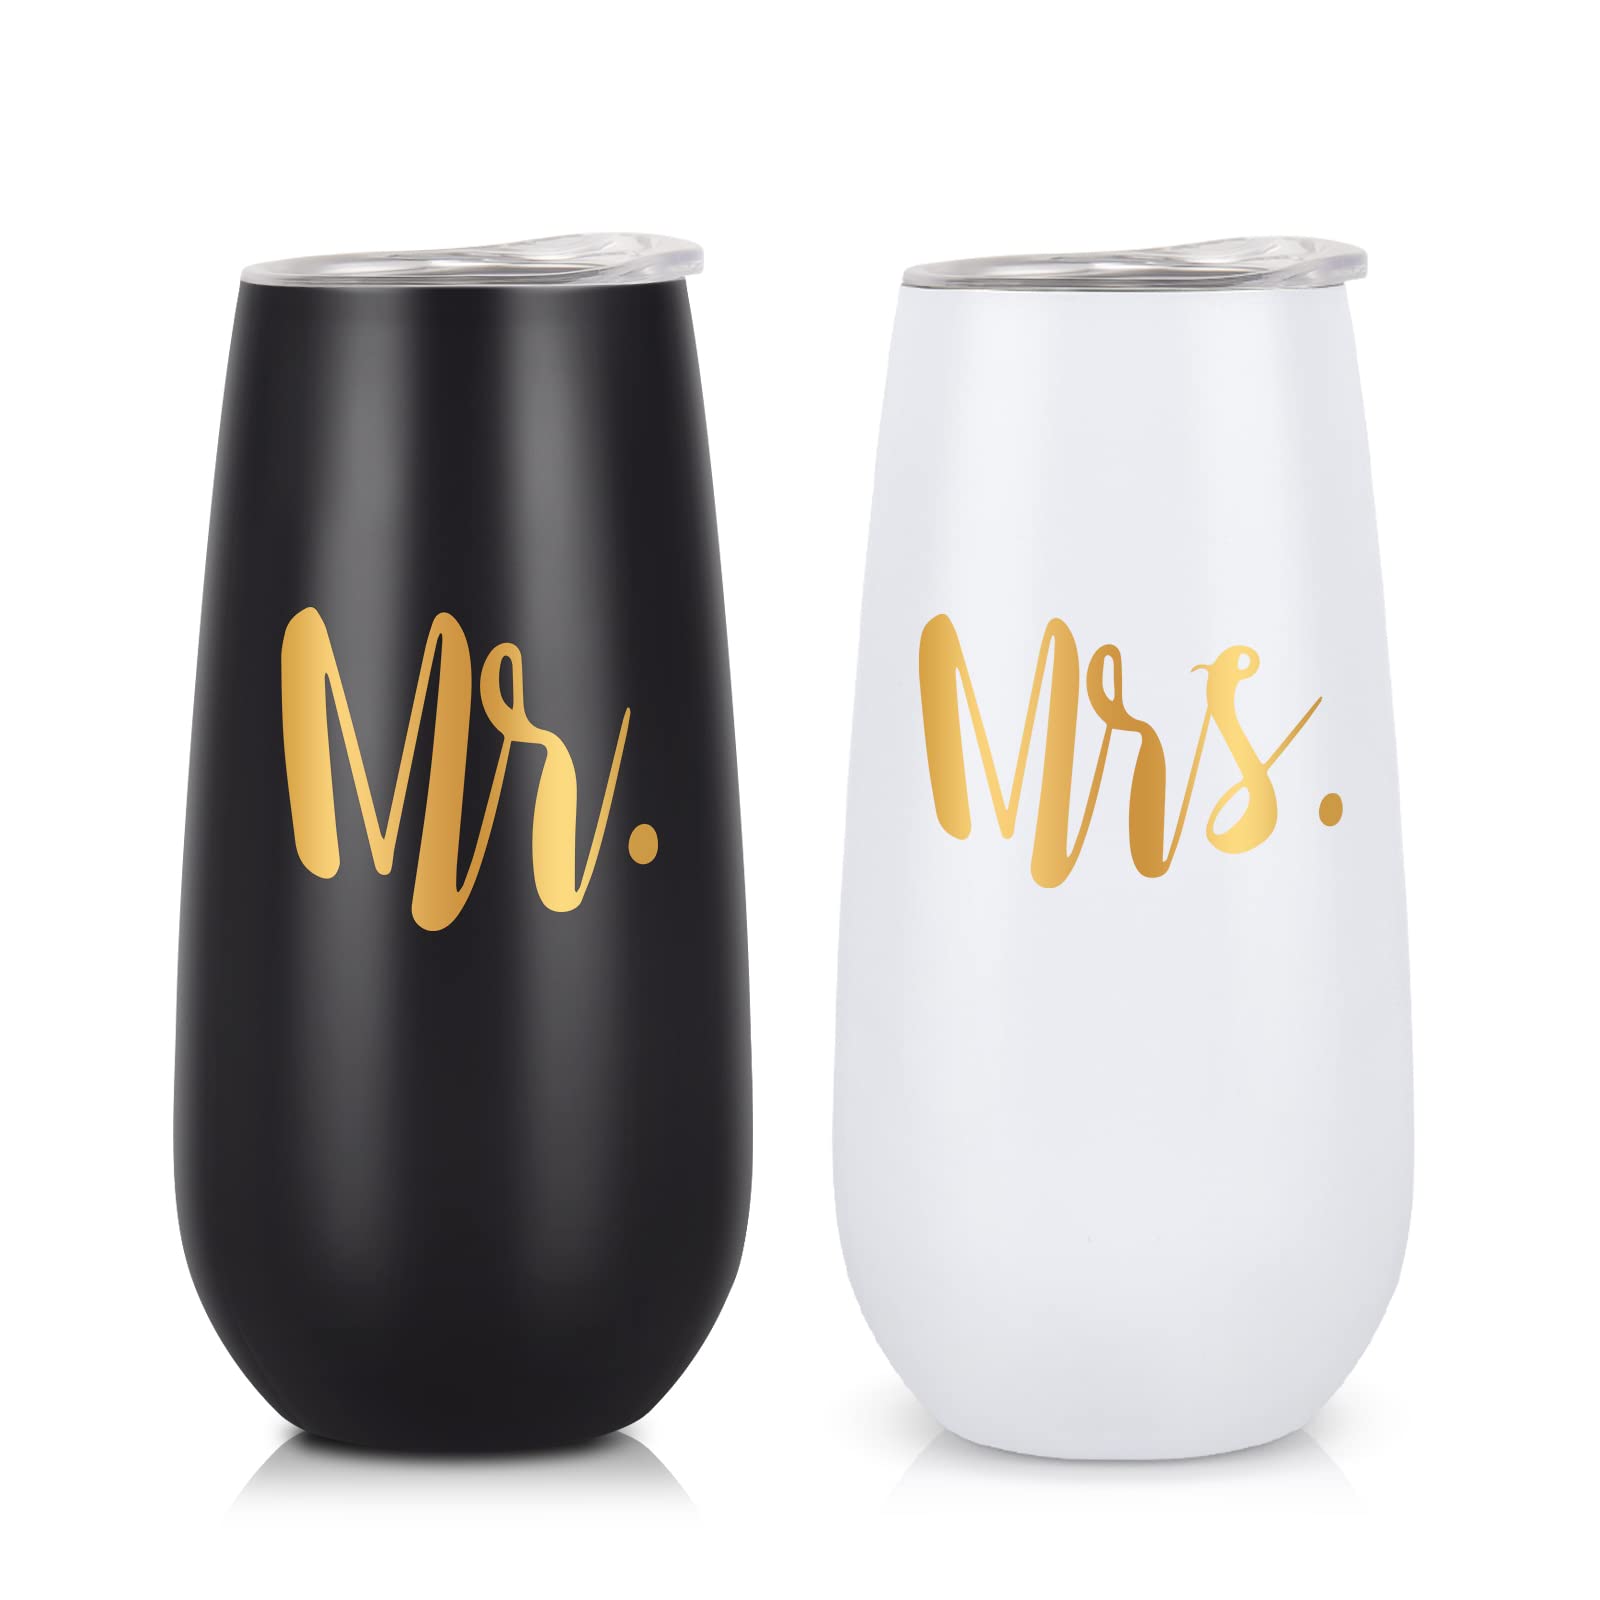 Lifecapido 2 Pack Mr and Mrs Stainless Steel Insulated Champagne Flute Tumbler, Engagement Wedding Gifts for Couples Newlyweds Bride Groom Wife His and Hers Anniversary Bridal Shower(6oz, Black&White)